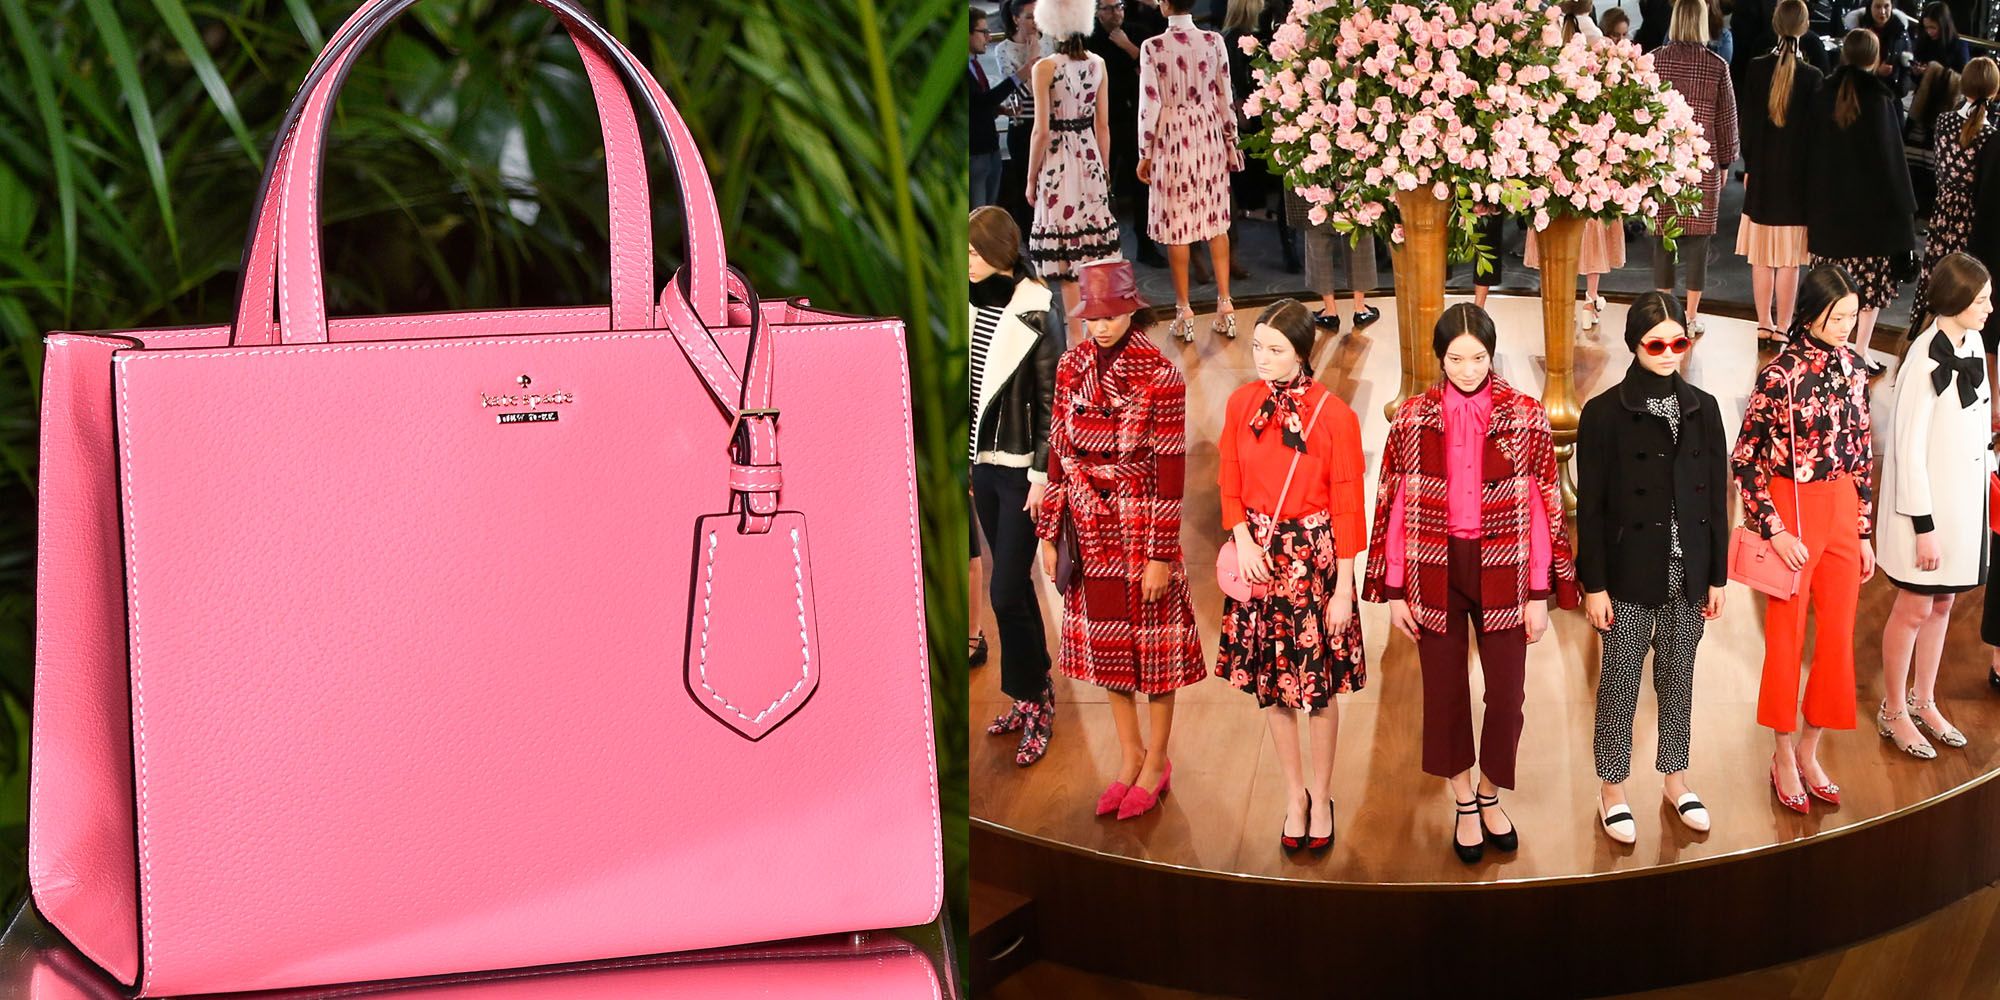 Kate Spade's Most Memorable Fashion Moments - Kate Spade Famous Designs